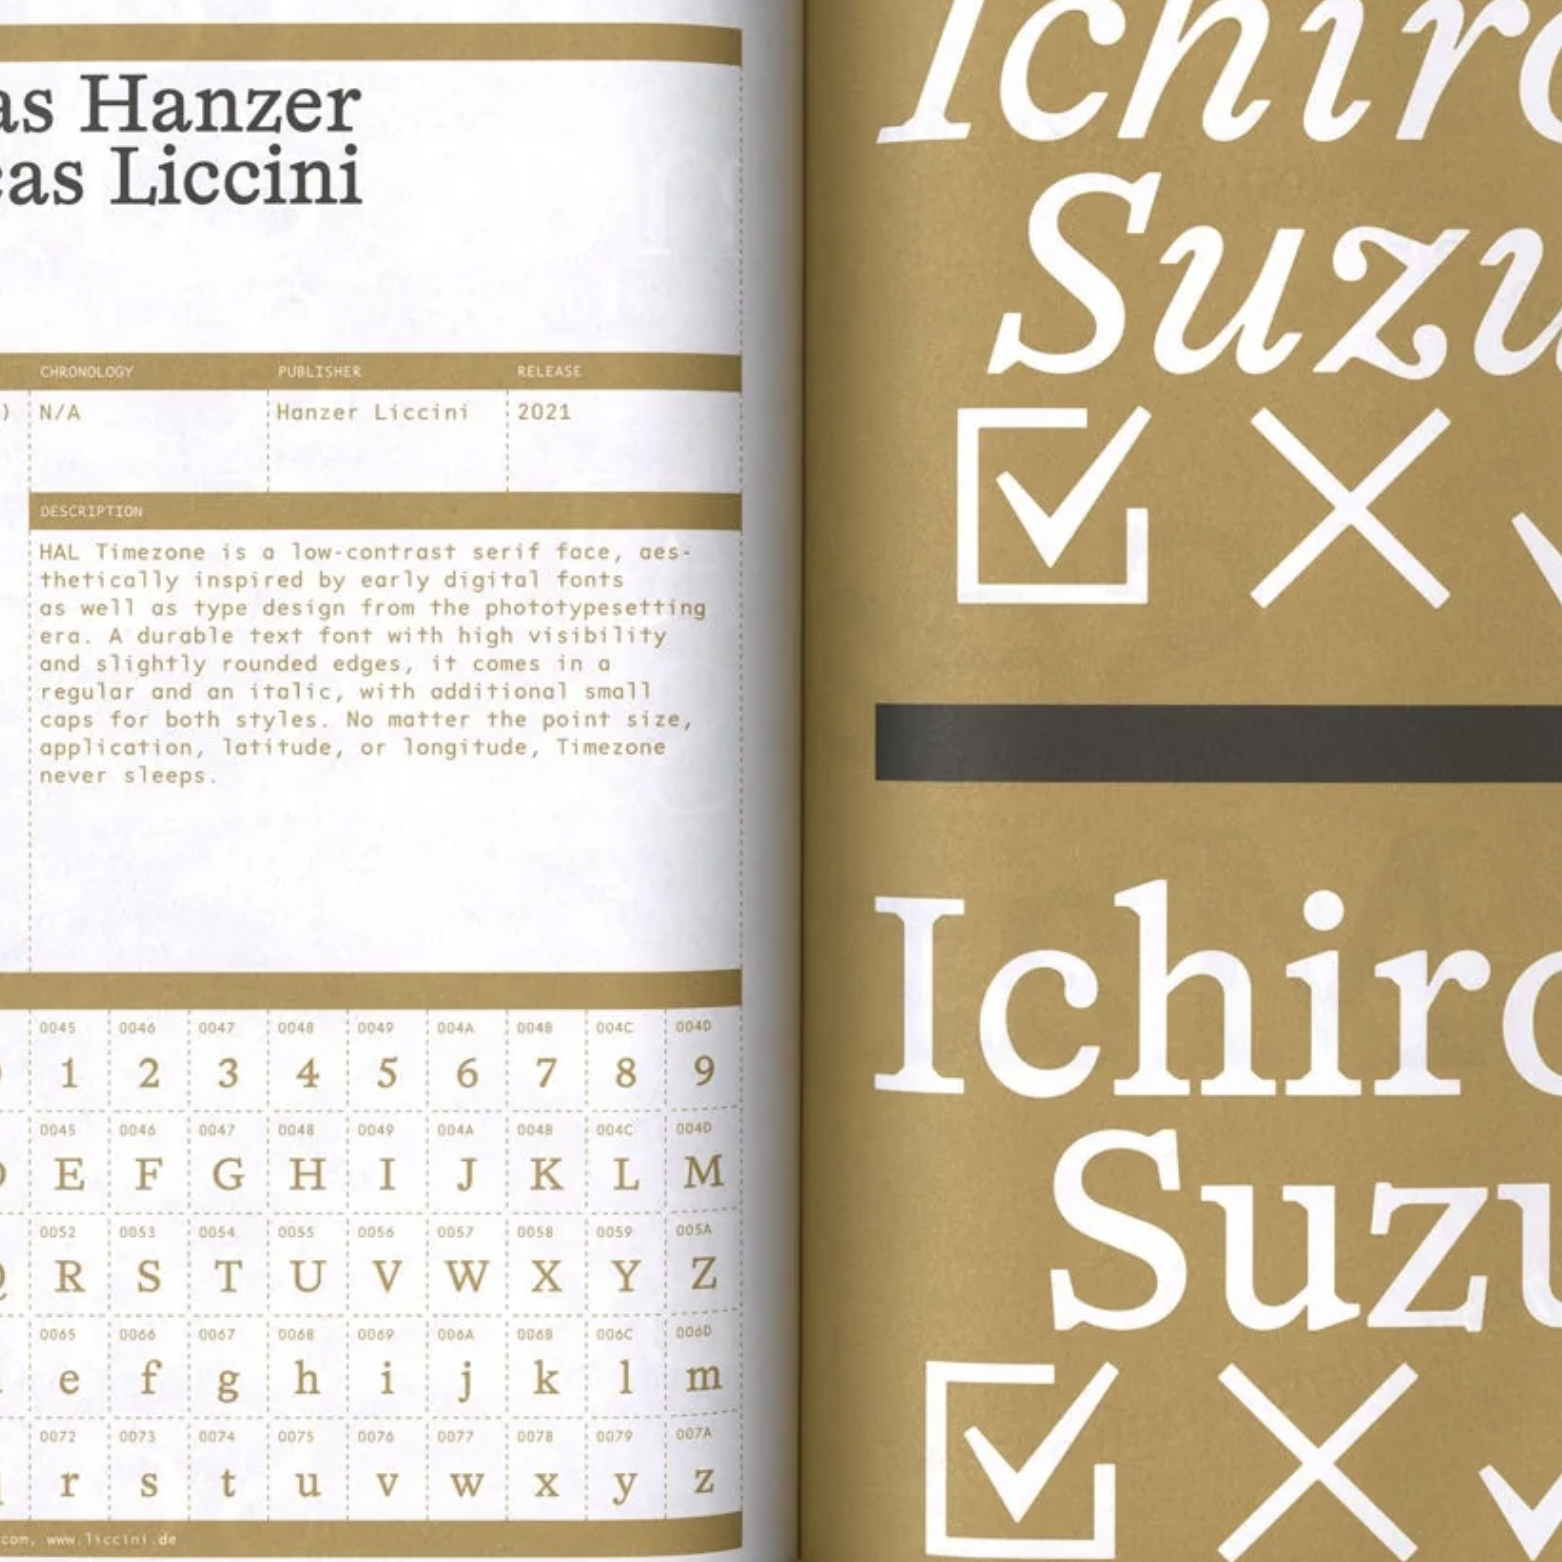 A preview of a type book with two pages open, white and gold background, with various lettering and ligatures sprea out